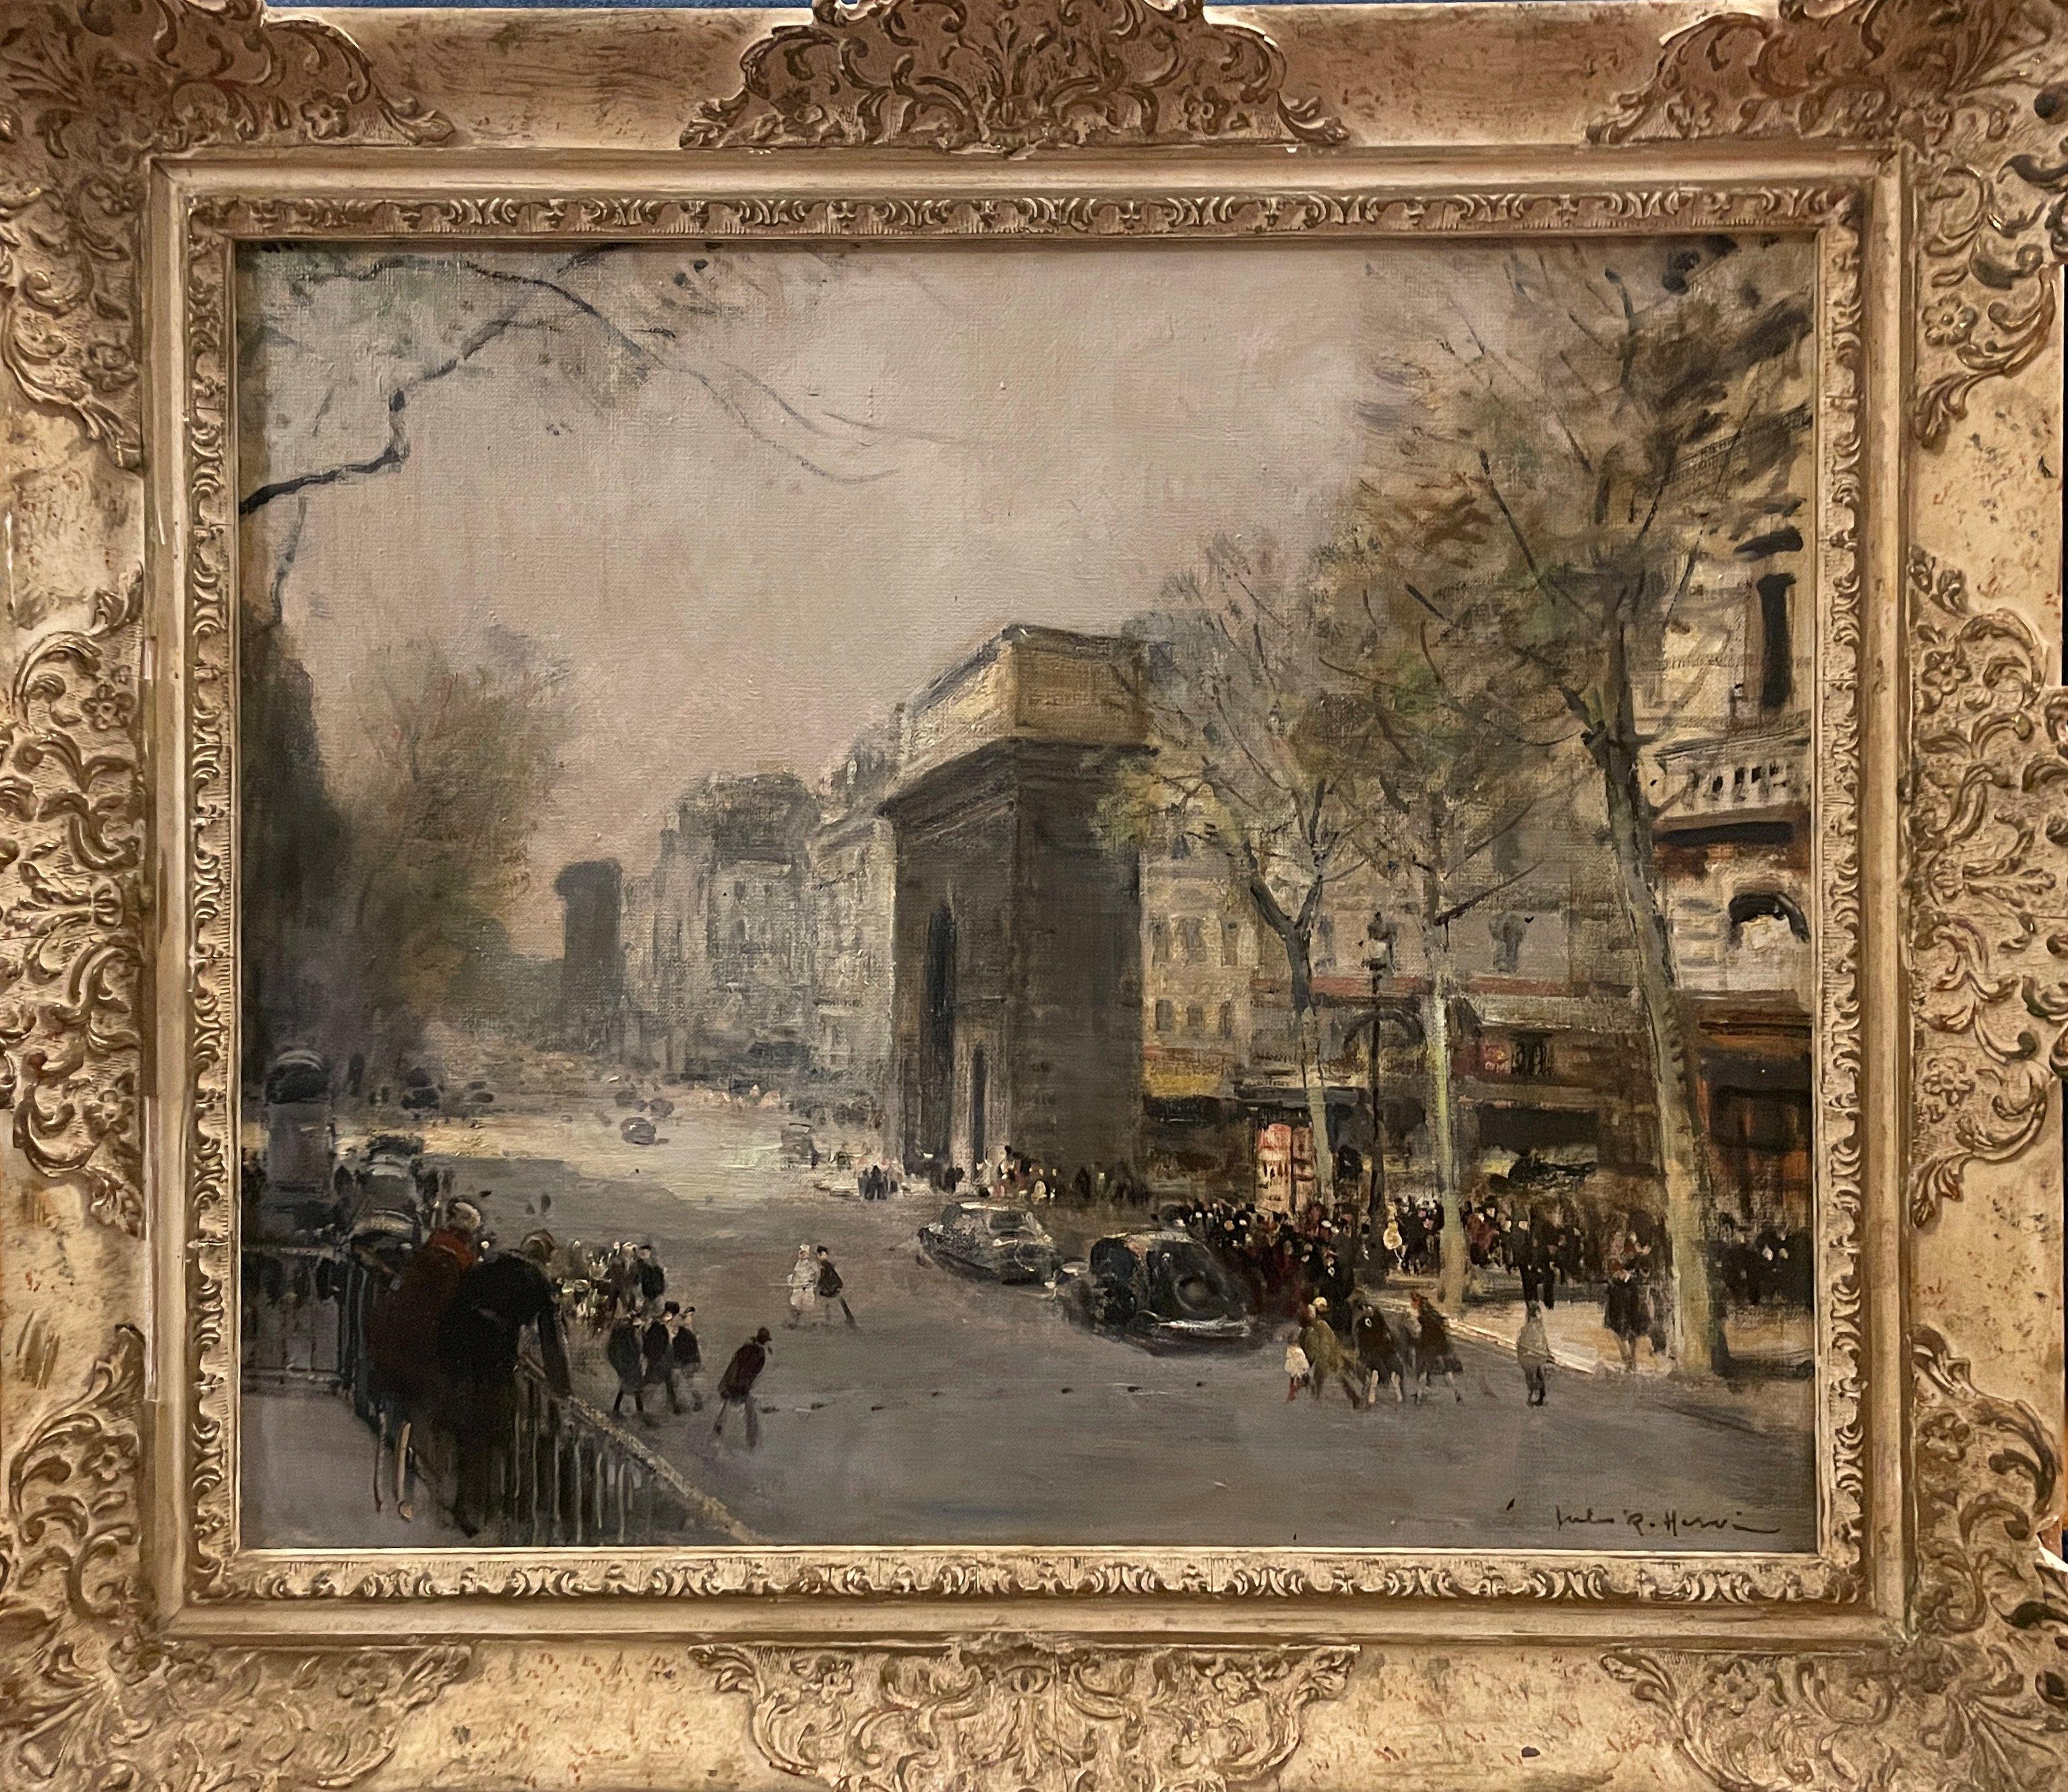 Jules Rene Herve (1887 - 1981)
Arc de Triomphe, Paris, France
Oil on canvas
18 x 21 1/2 inches
Signed lower right and on the reverse

Provenance:
Harrod's, London, 1959
Mr. and Mrs. J.T. Whallon (acquired from the above)
Jack Barclay, St. Joseph,